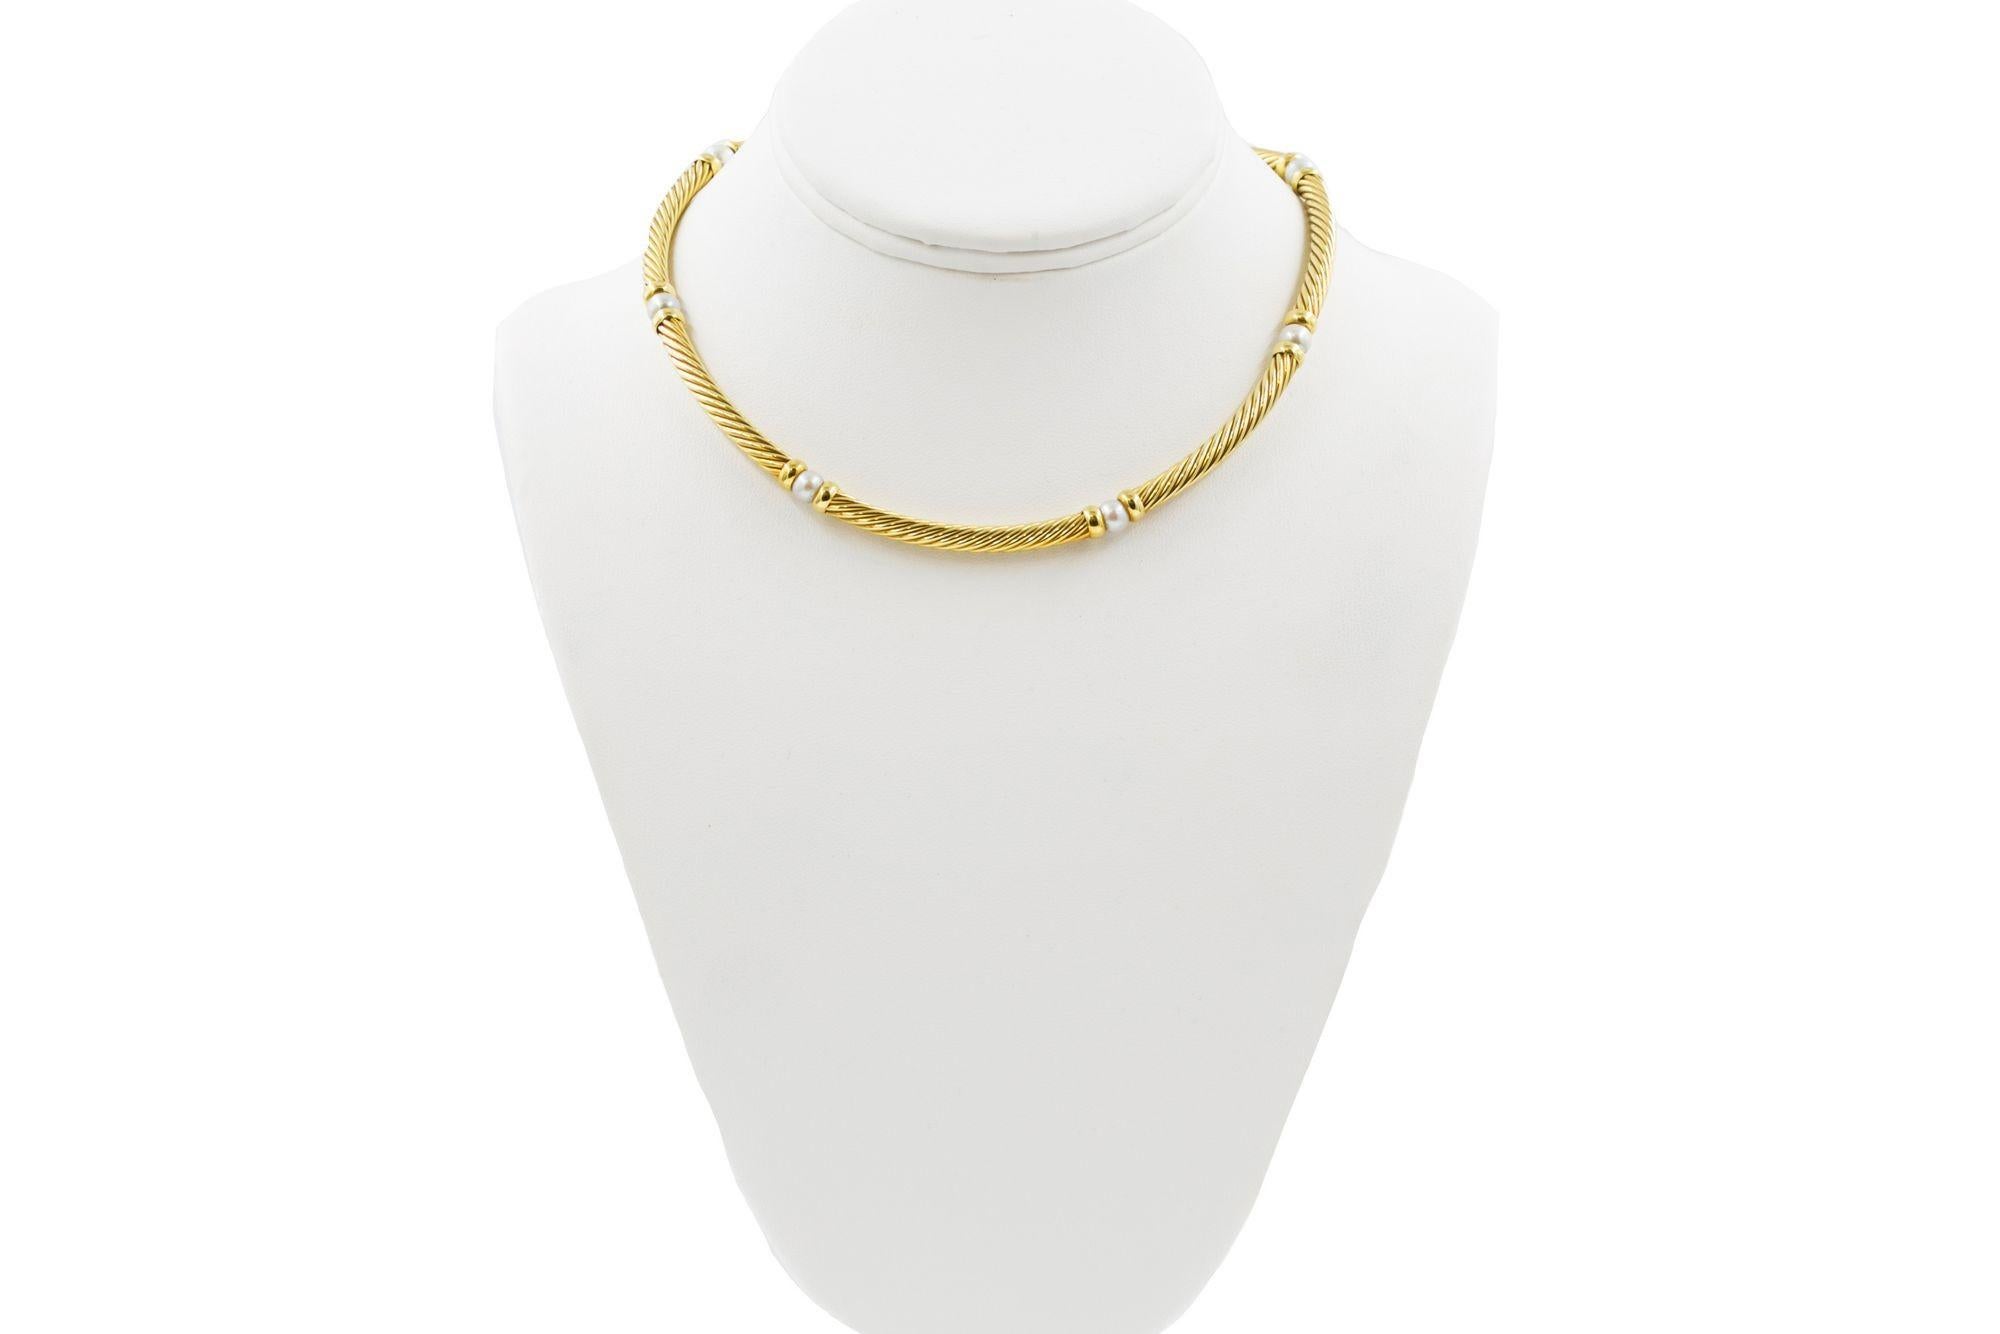 American David Yurman 18k Yellow Gold “Cable” Necklace with 6 Cultured Pearls